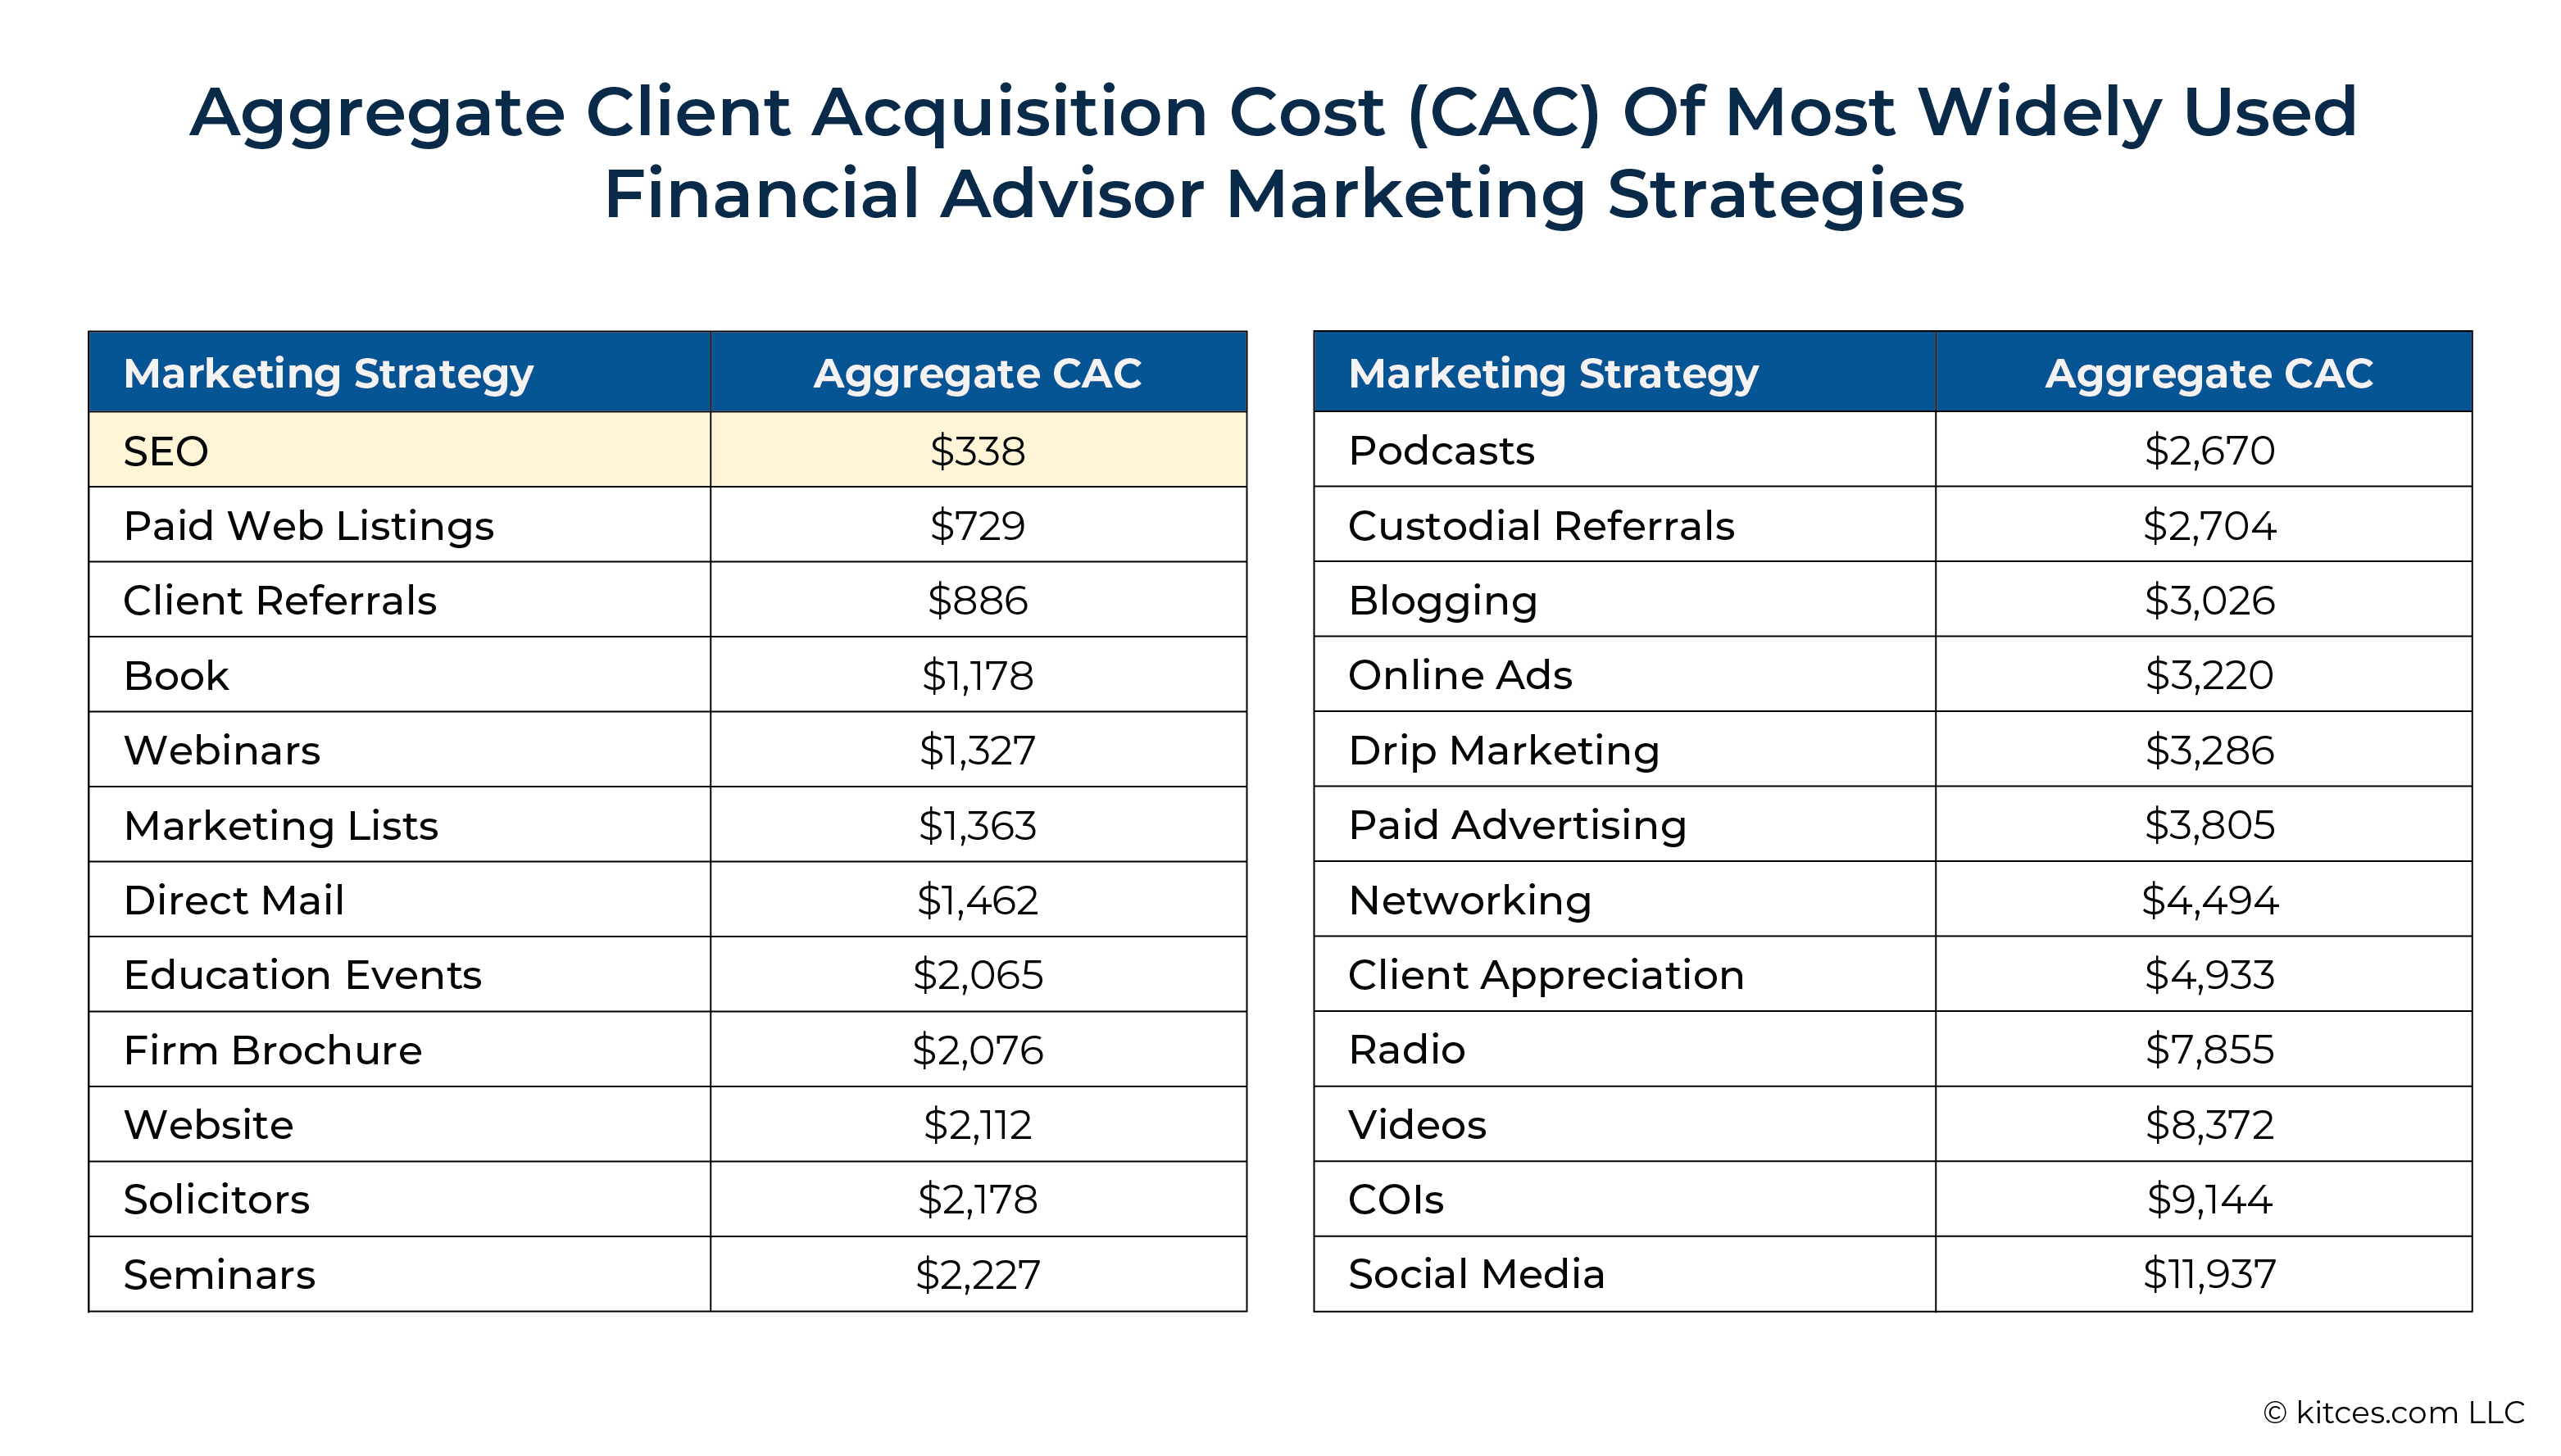 Aggregate CAC Of Most Widely Used Financial Advisor Marketing Strategies